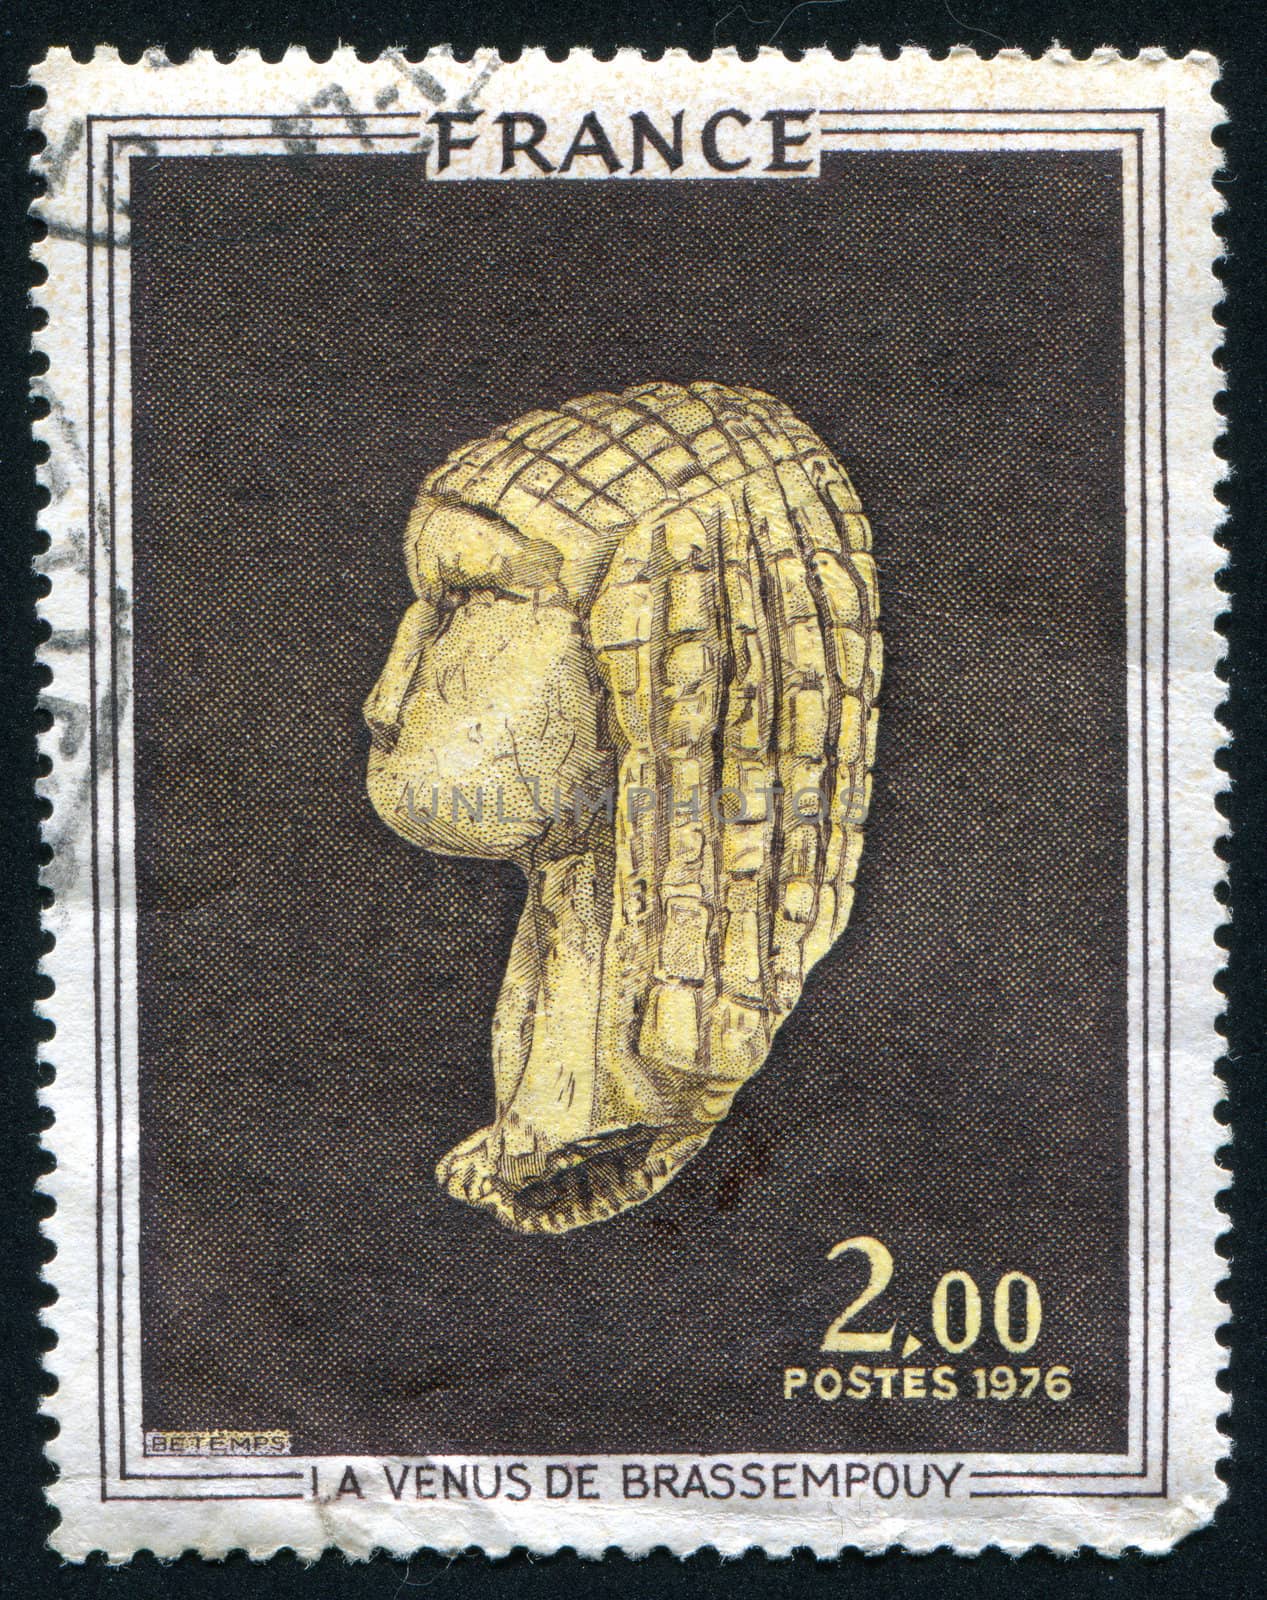 FRANCE - CIRCA 1976: stamp printed by France, shows Venus of Brassempouy, circa 1976